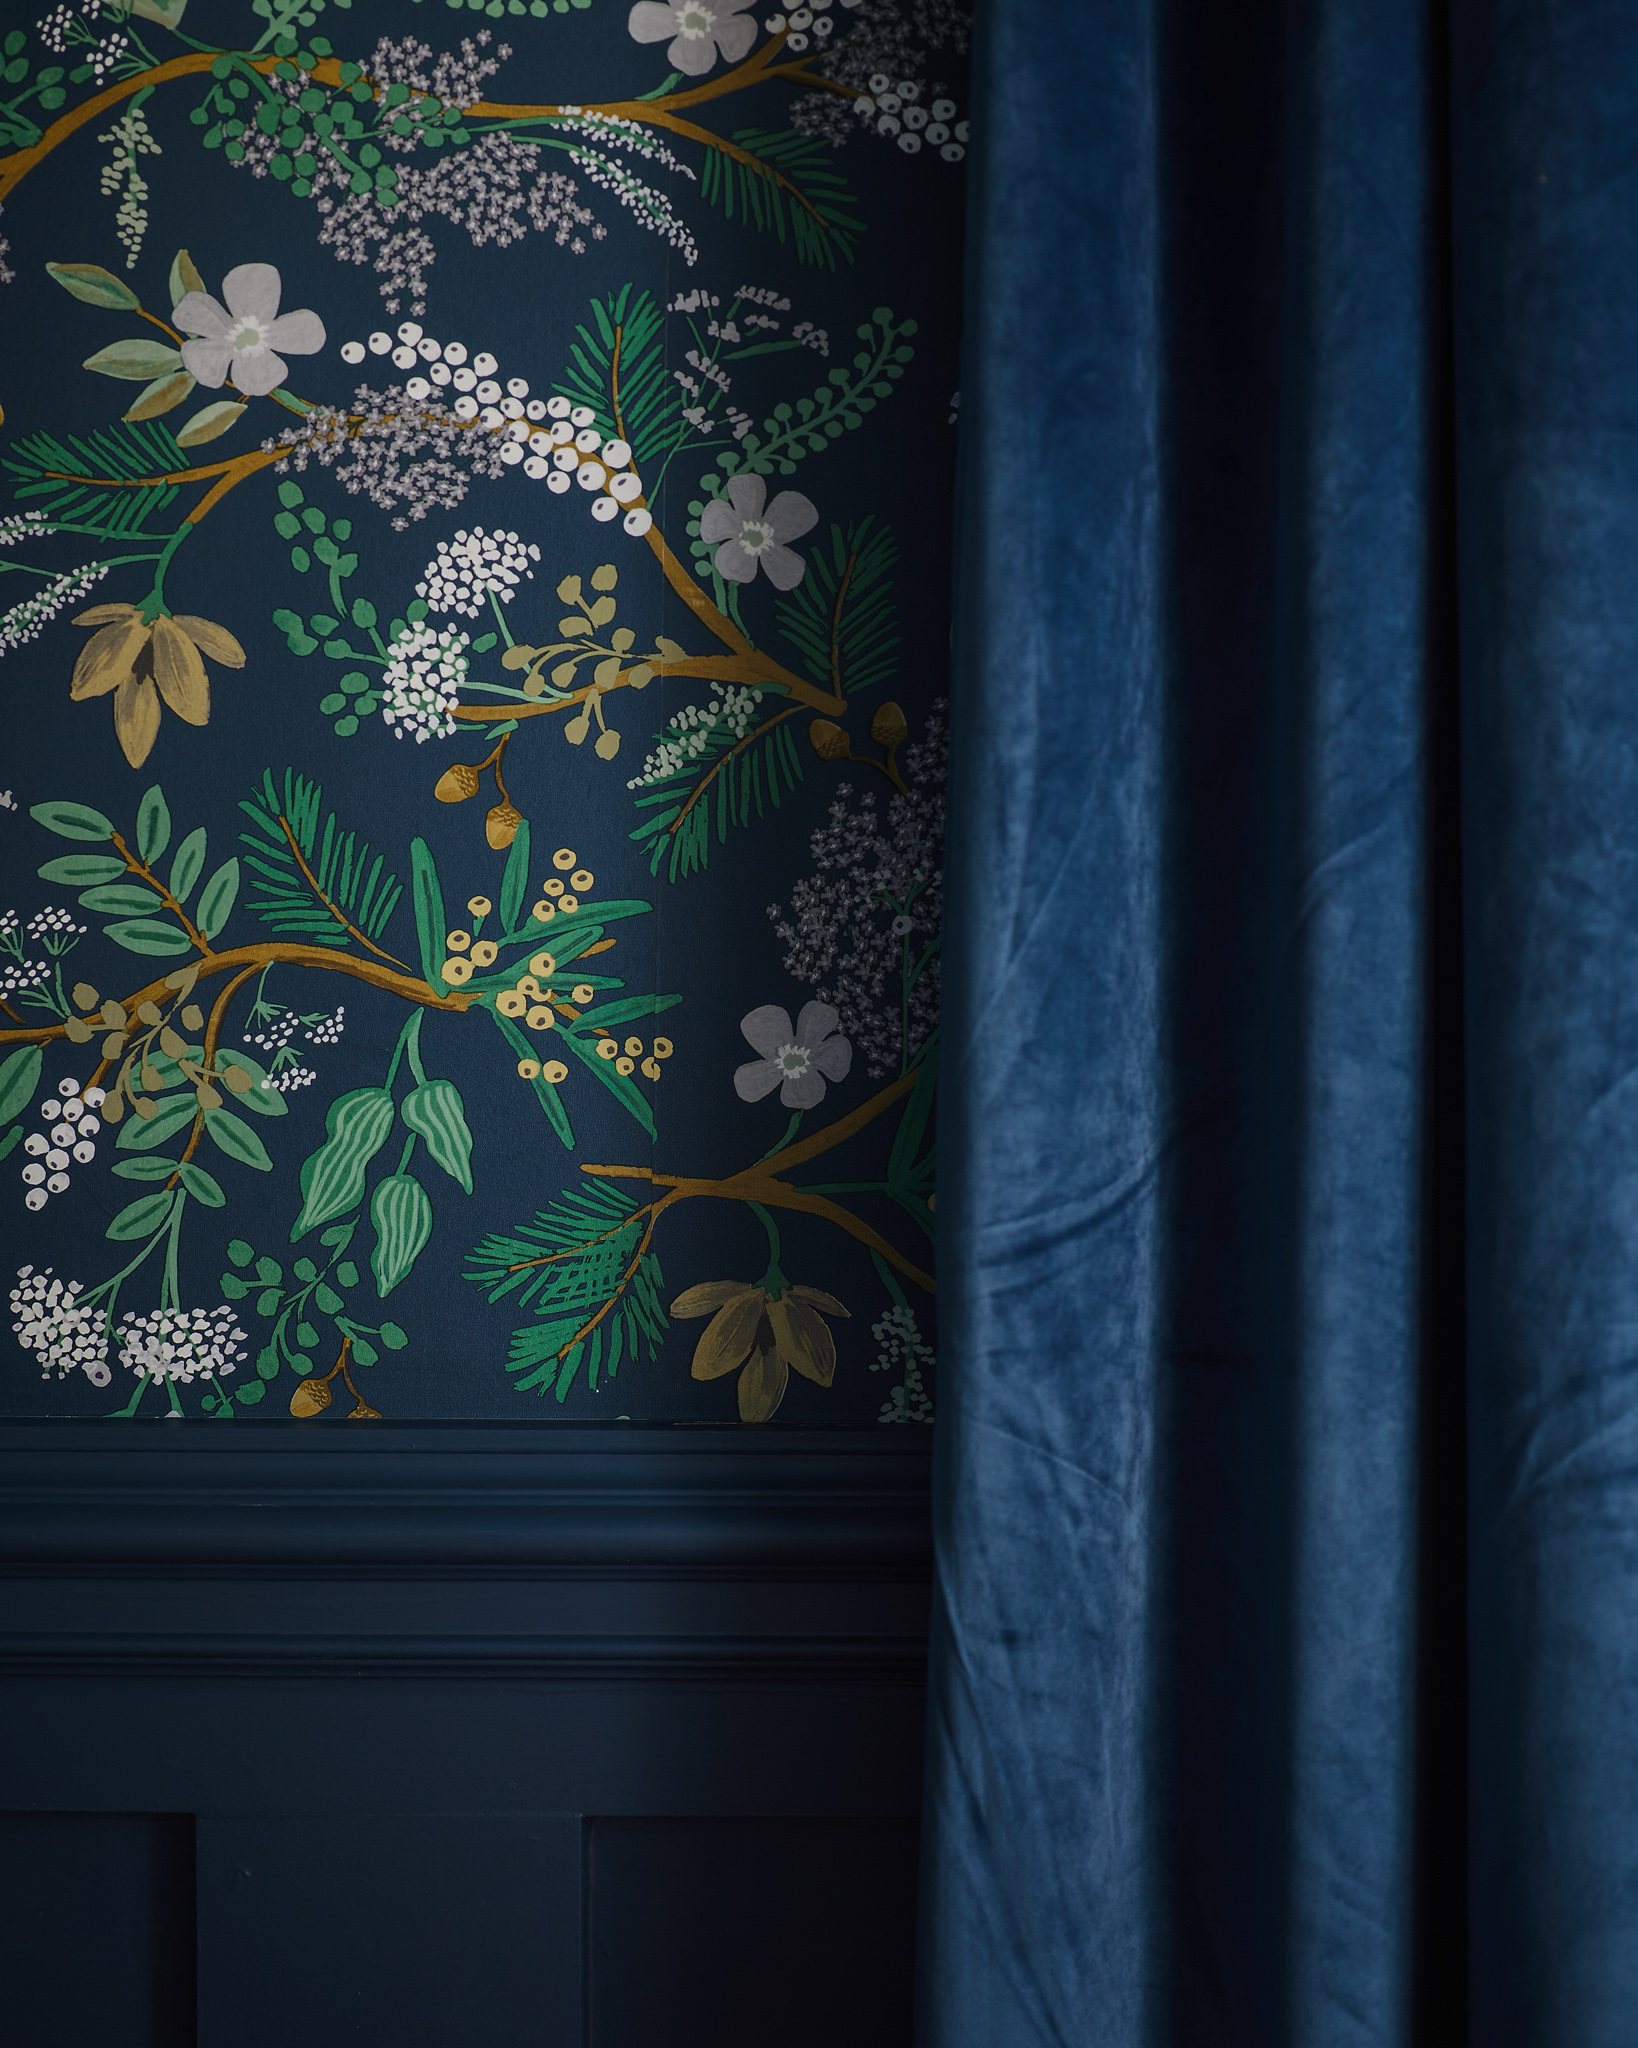 Rifle Paper Co. floral wallpaper and velvet curtains - In Honor Of Design